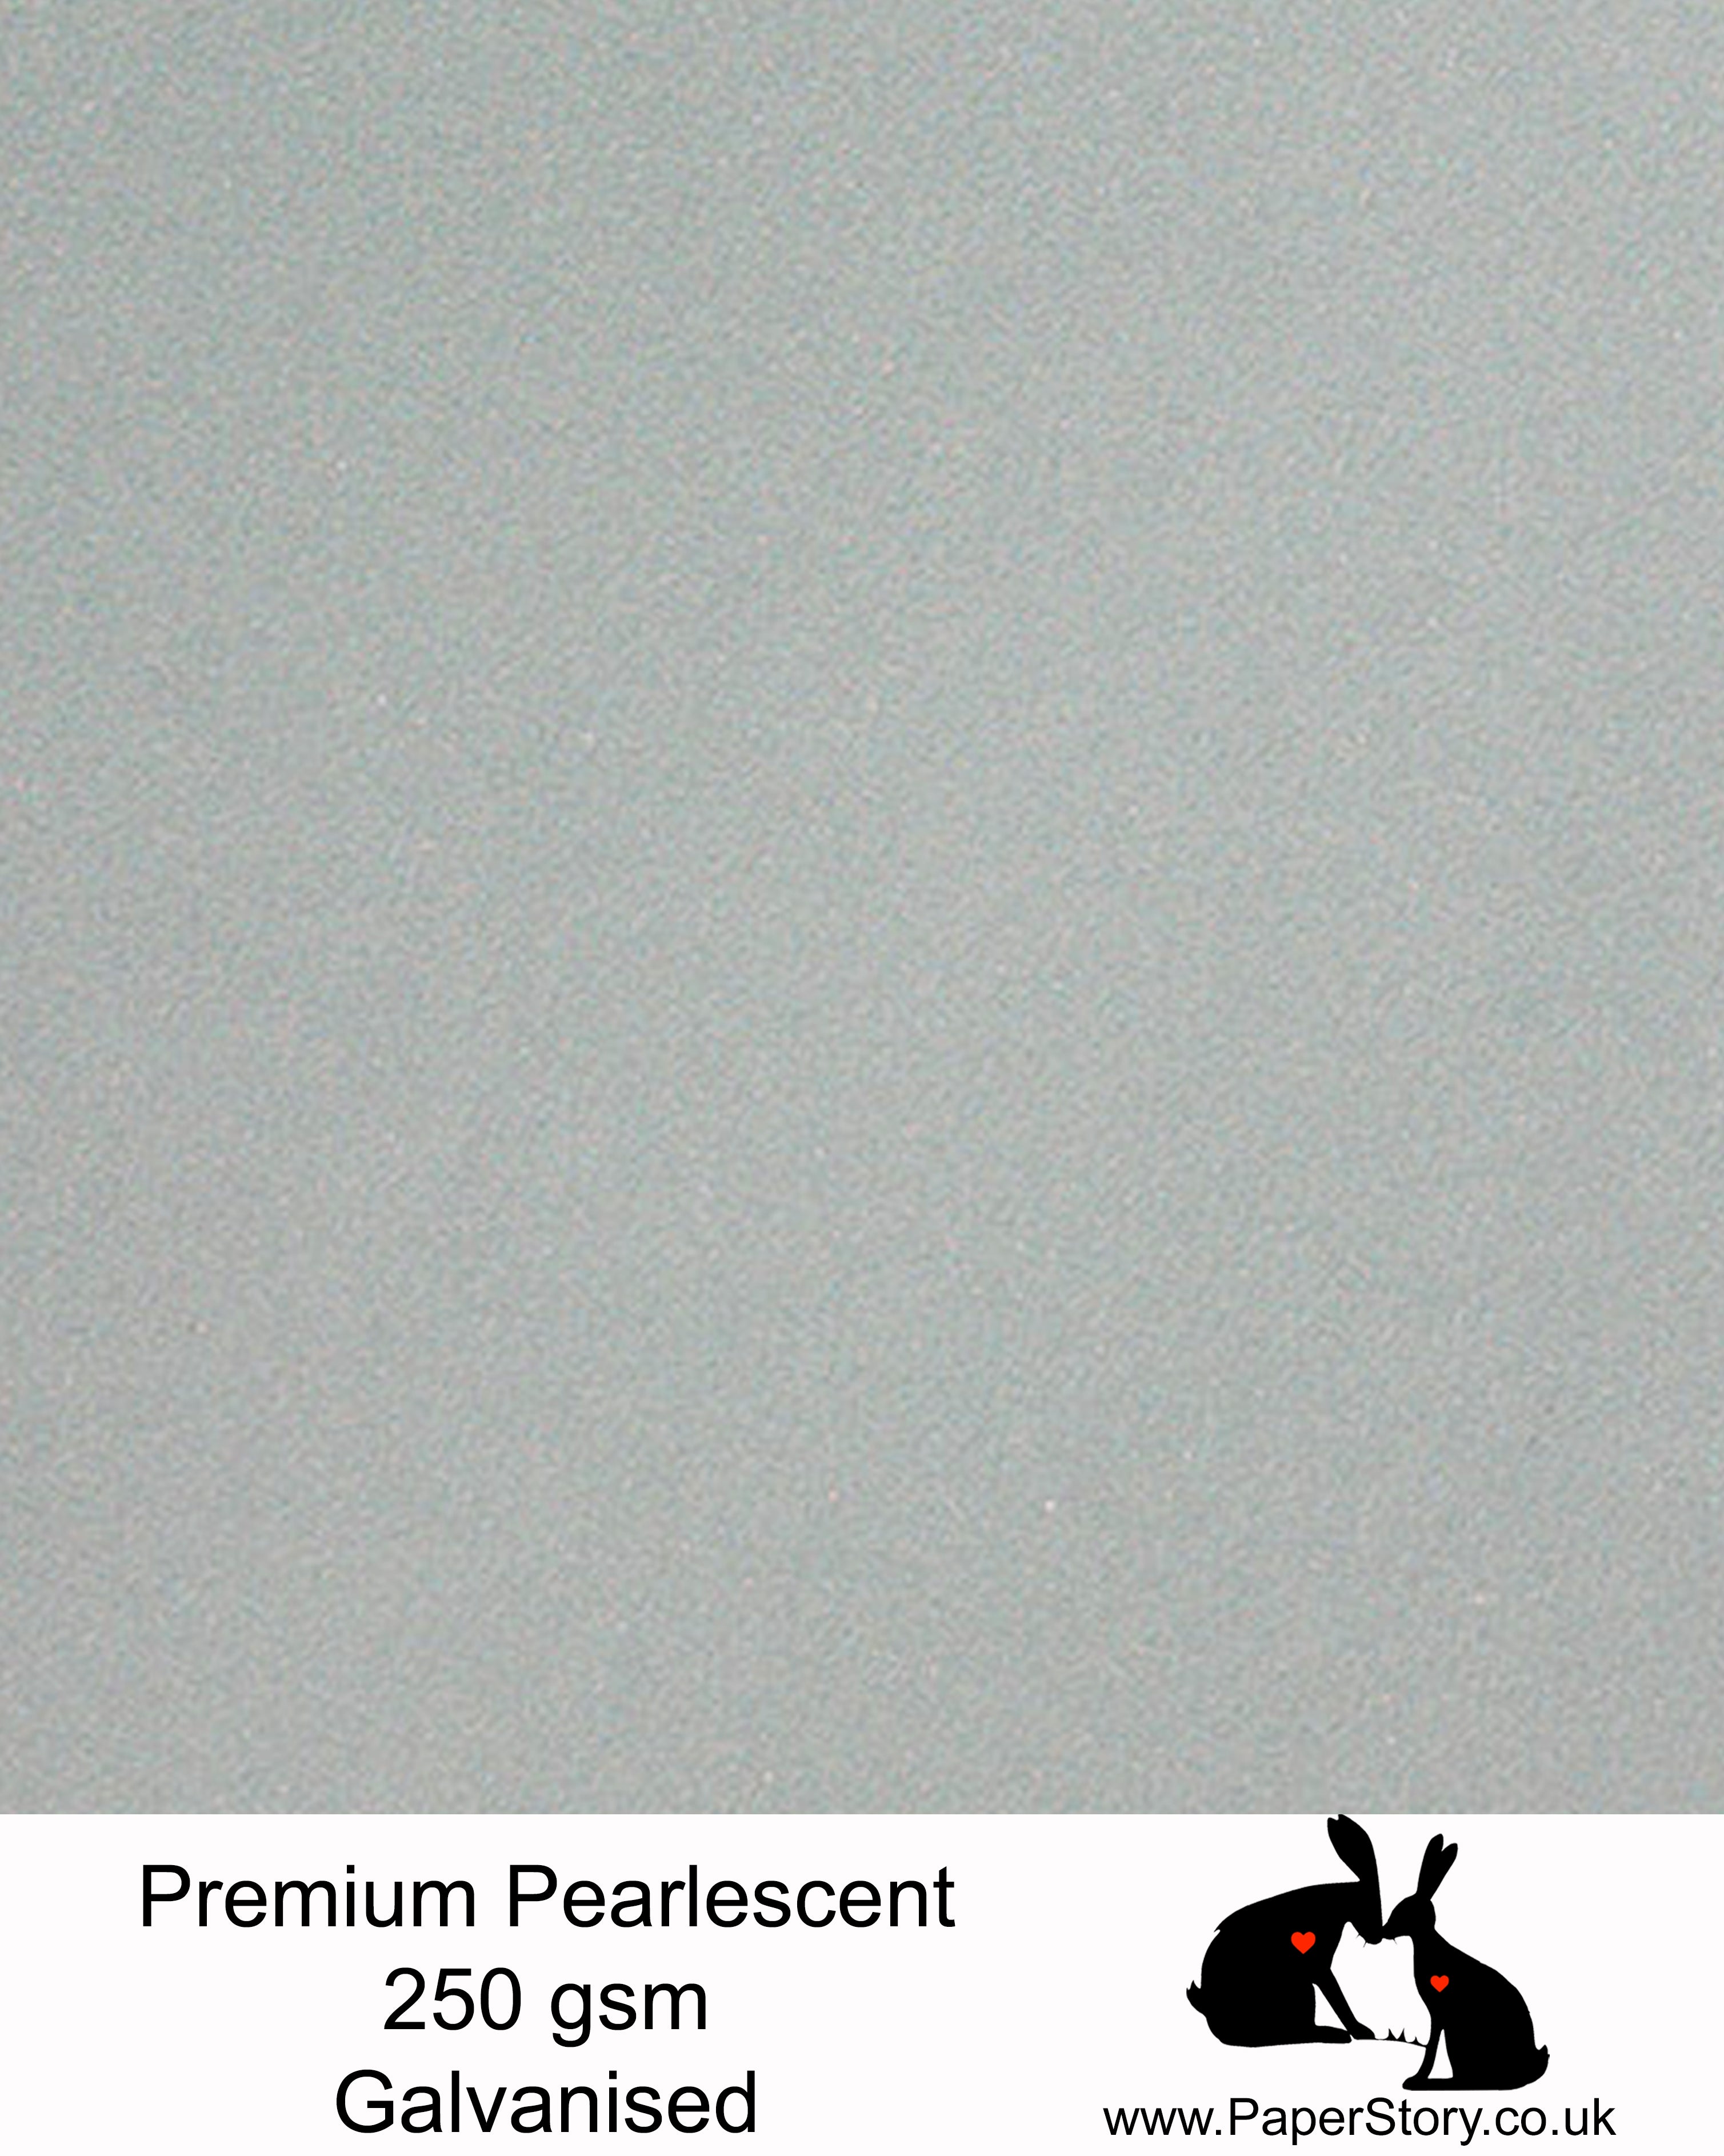 Pearlescent Premium Silver 250 gsm card. Stunning metallic silver shimmering card, Perfect  for crafters, card makers, stationery and for backing art